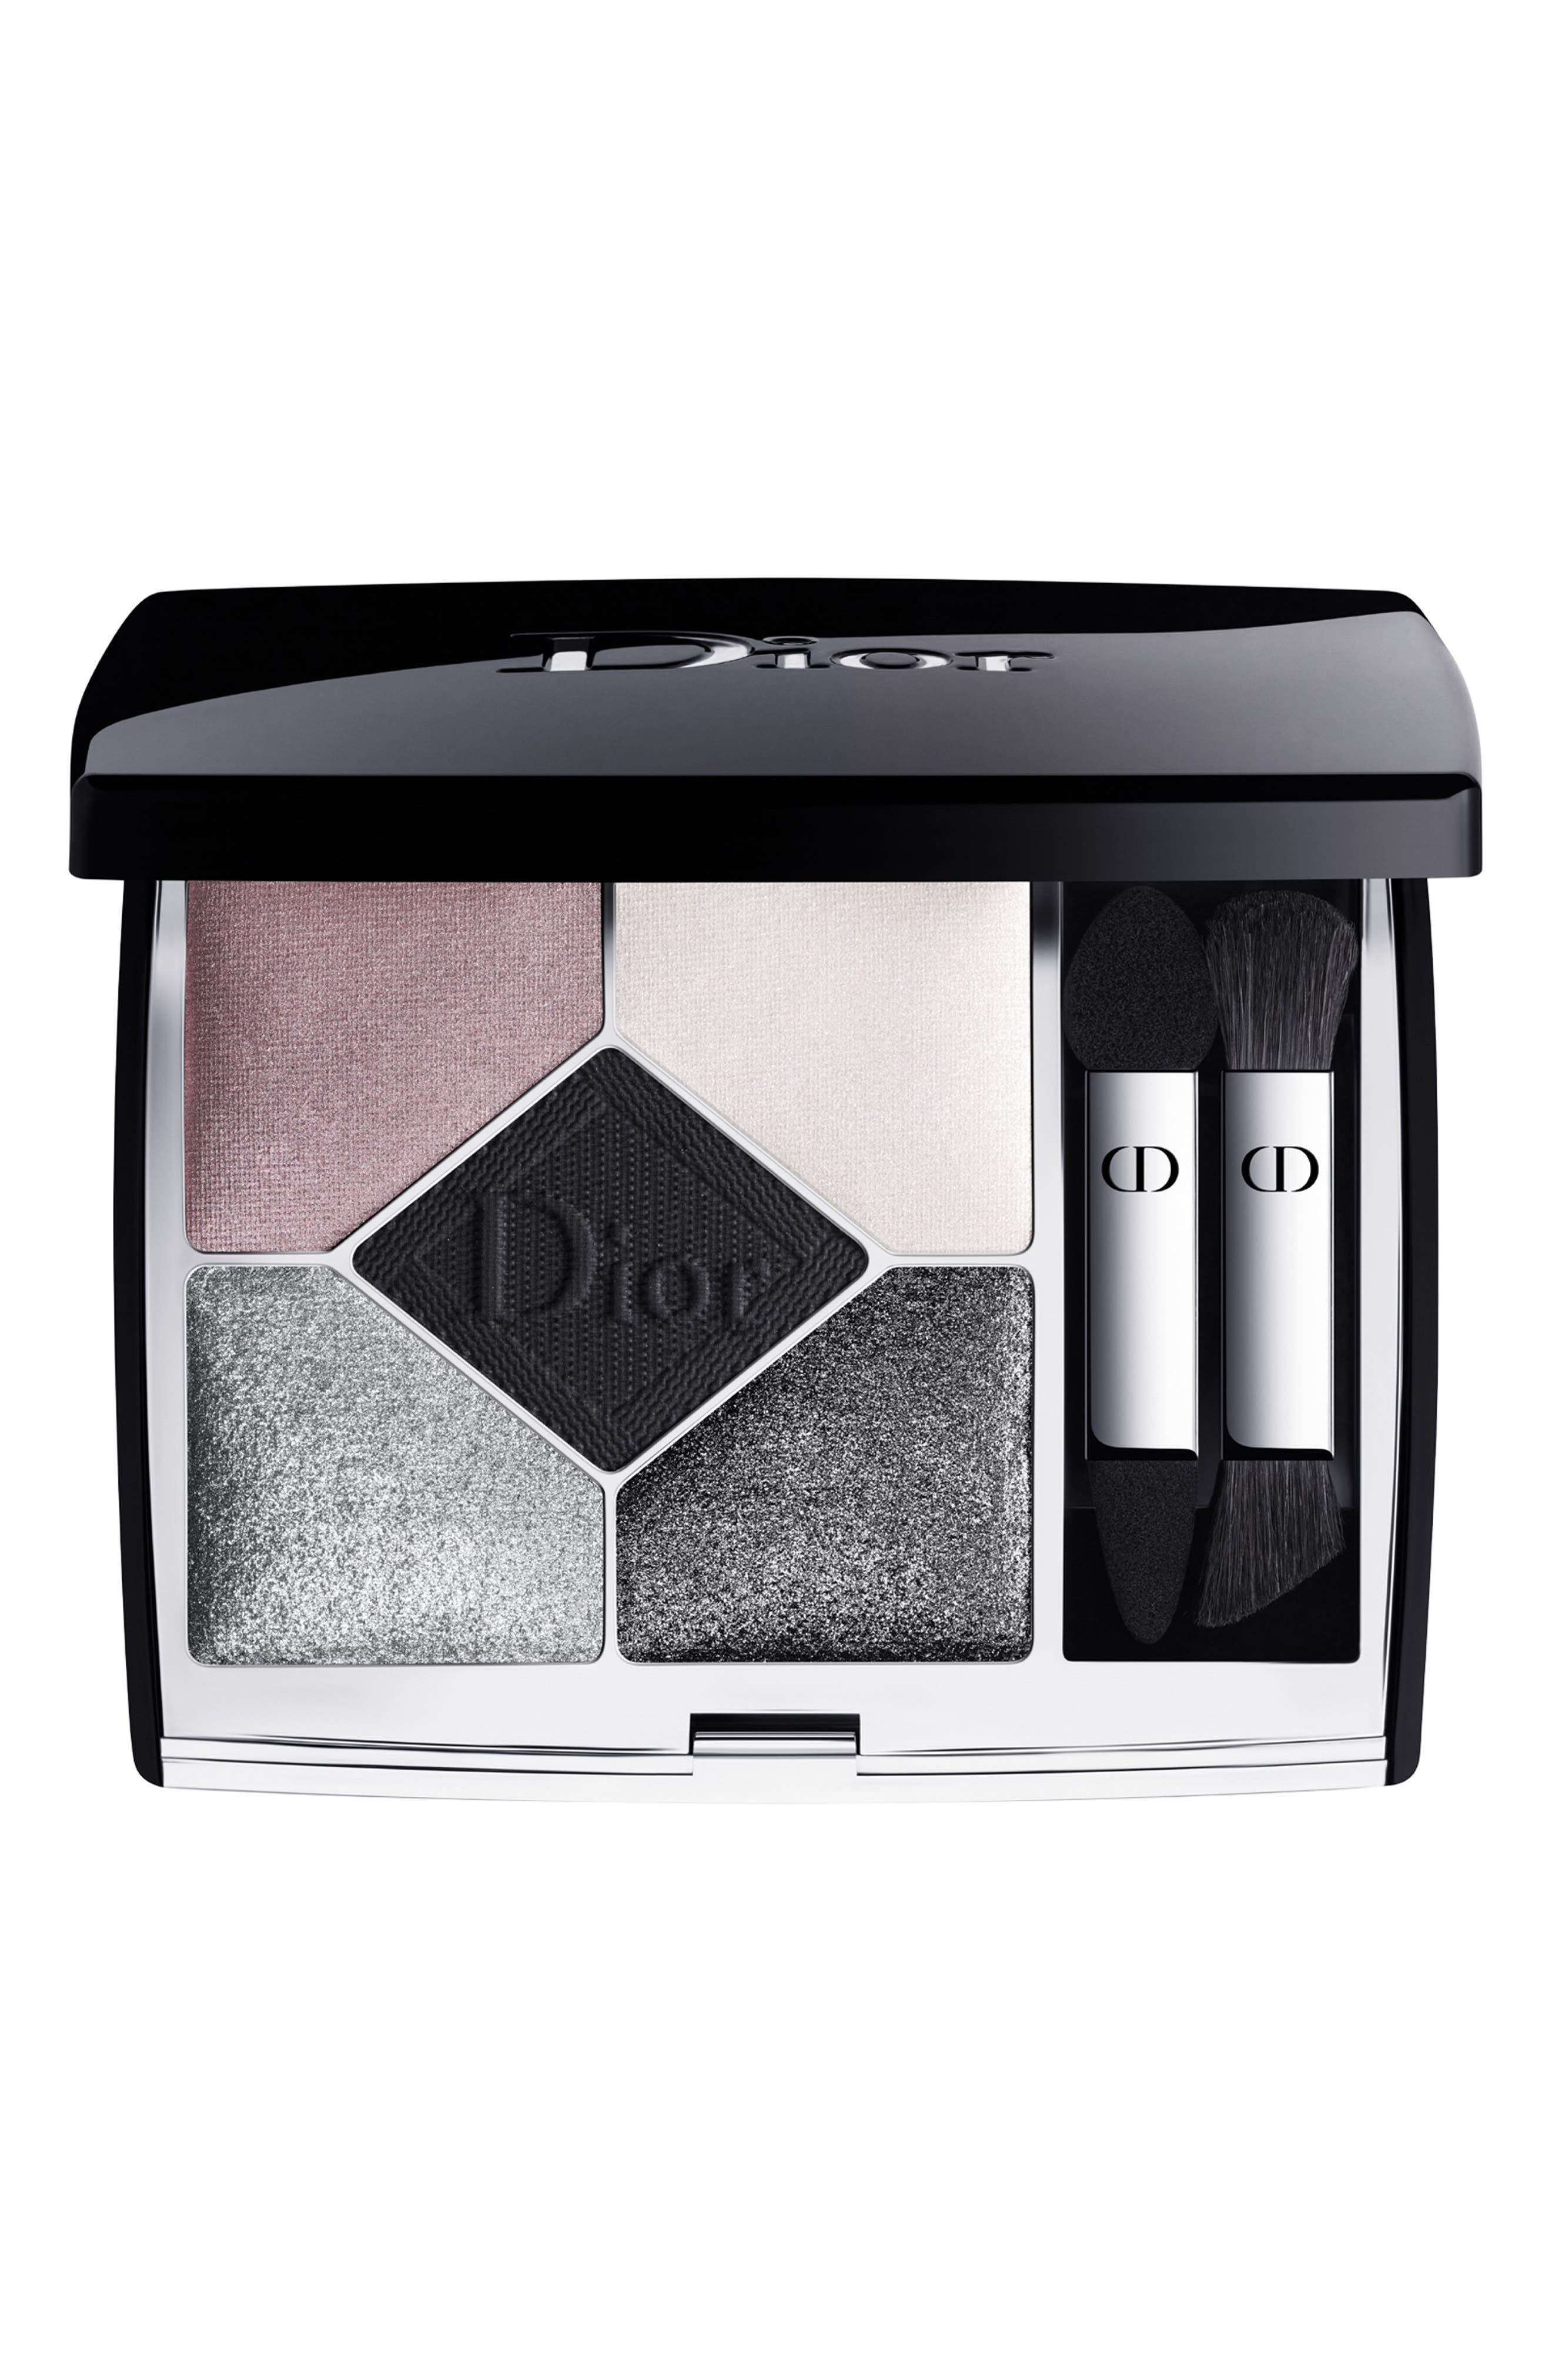 Dior 5 Couleurs Couture Eyeshadow Palette in 079 Black Bow